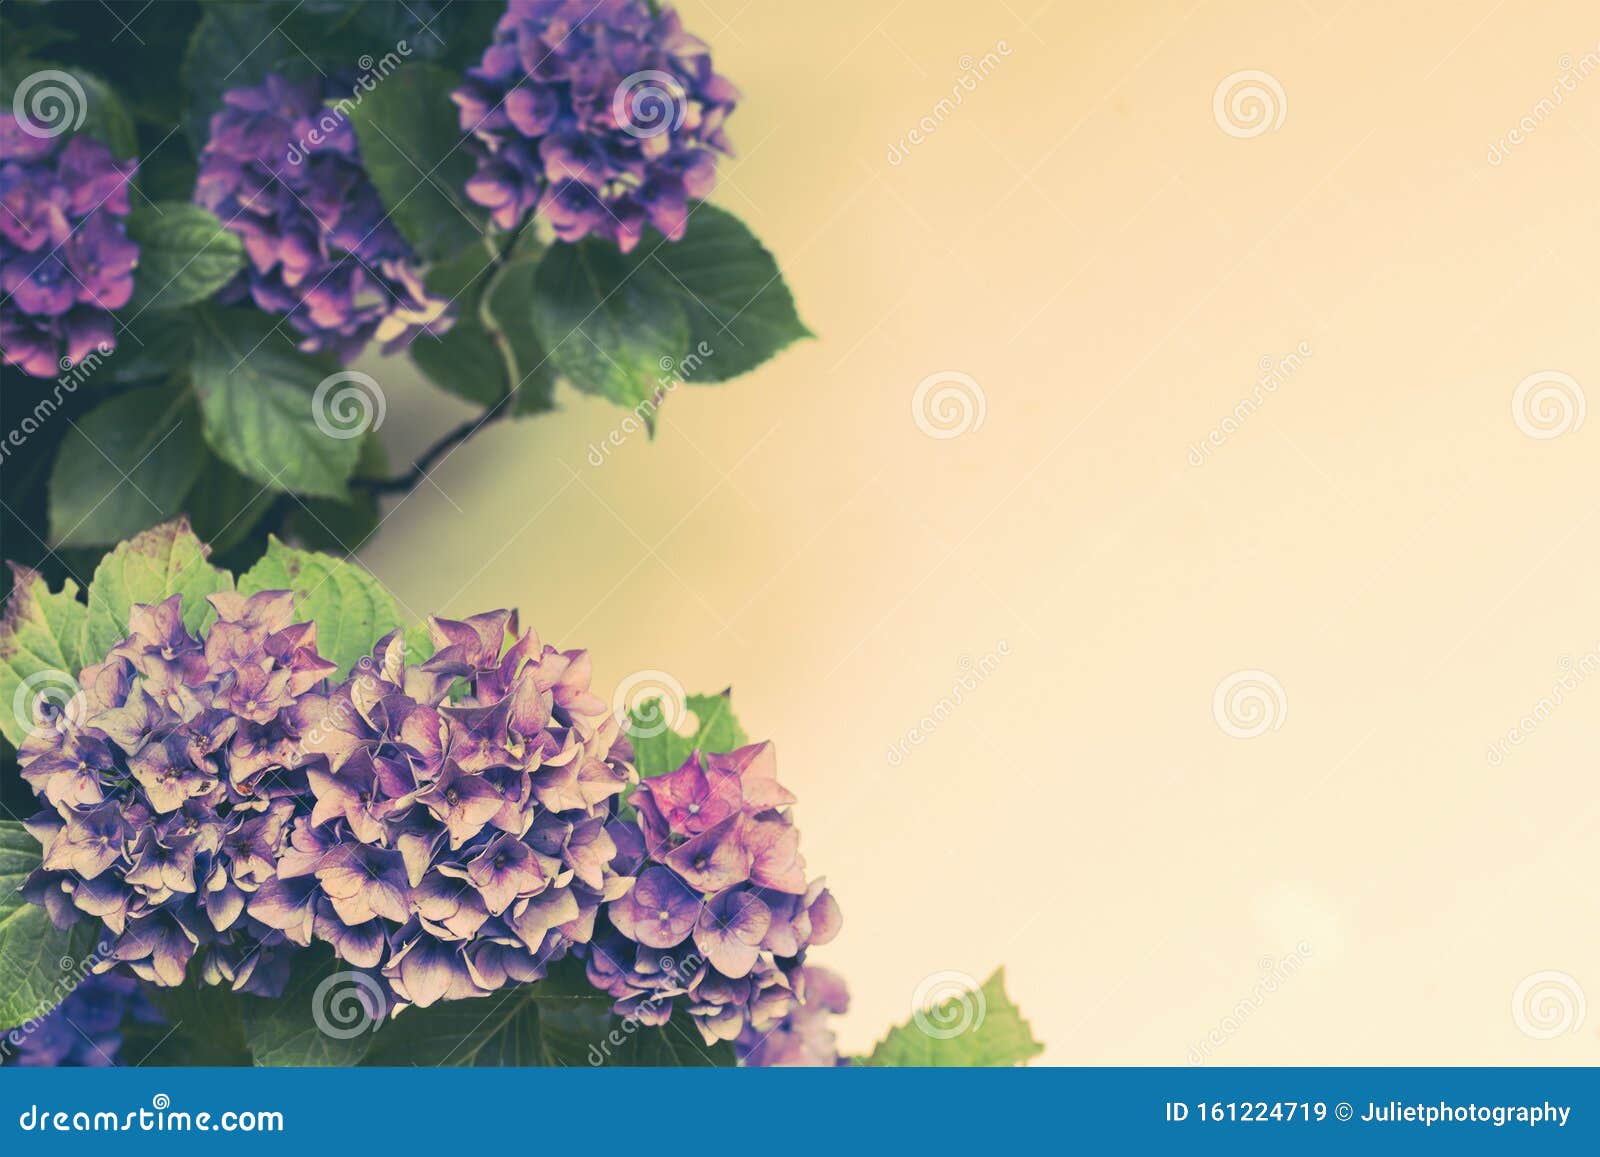 Beautiful, Vintage Style Flora Background with Hydrangea or Hortensia  Bloosom in the Garden Stock Image - Image of beautiful, botany: 161224719